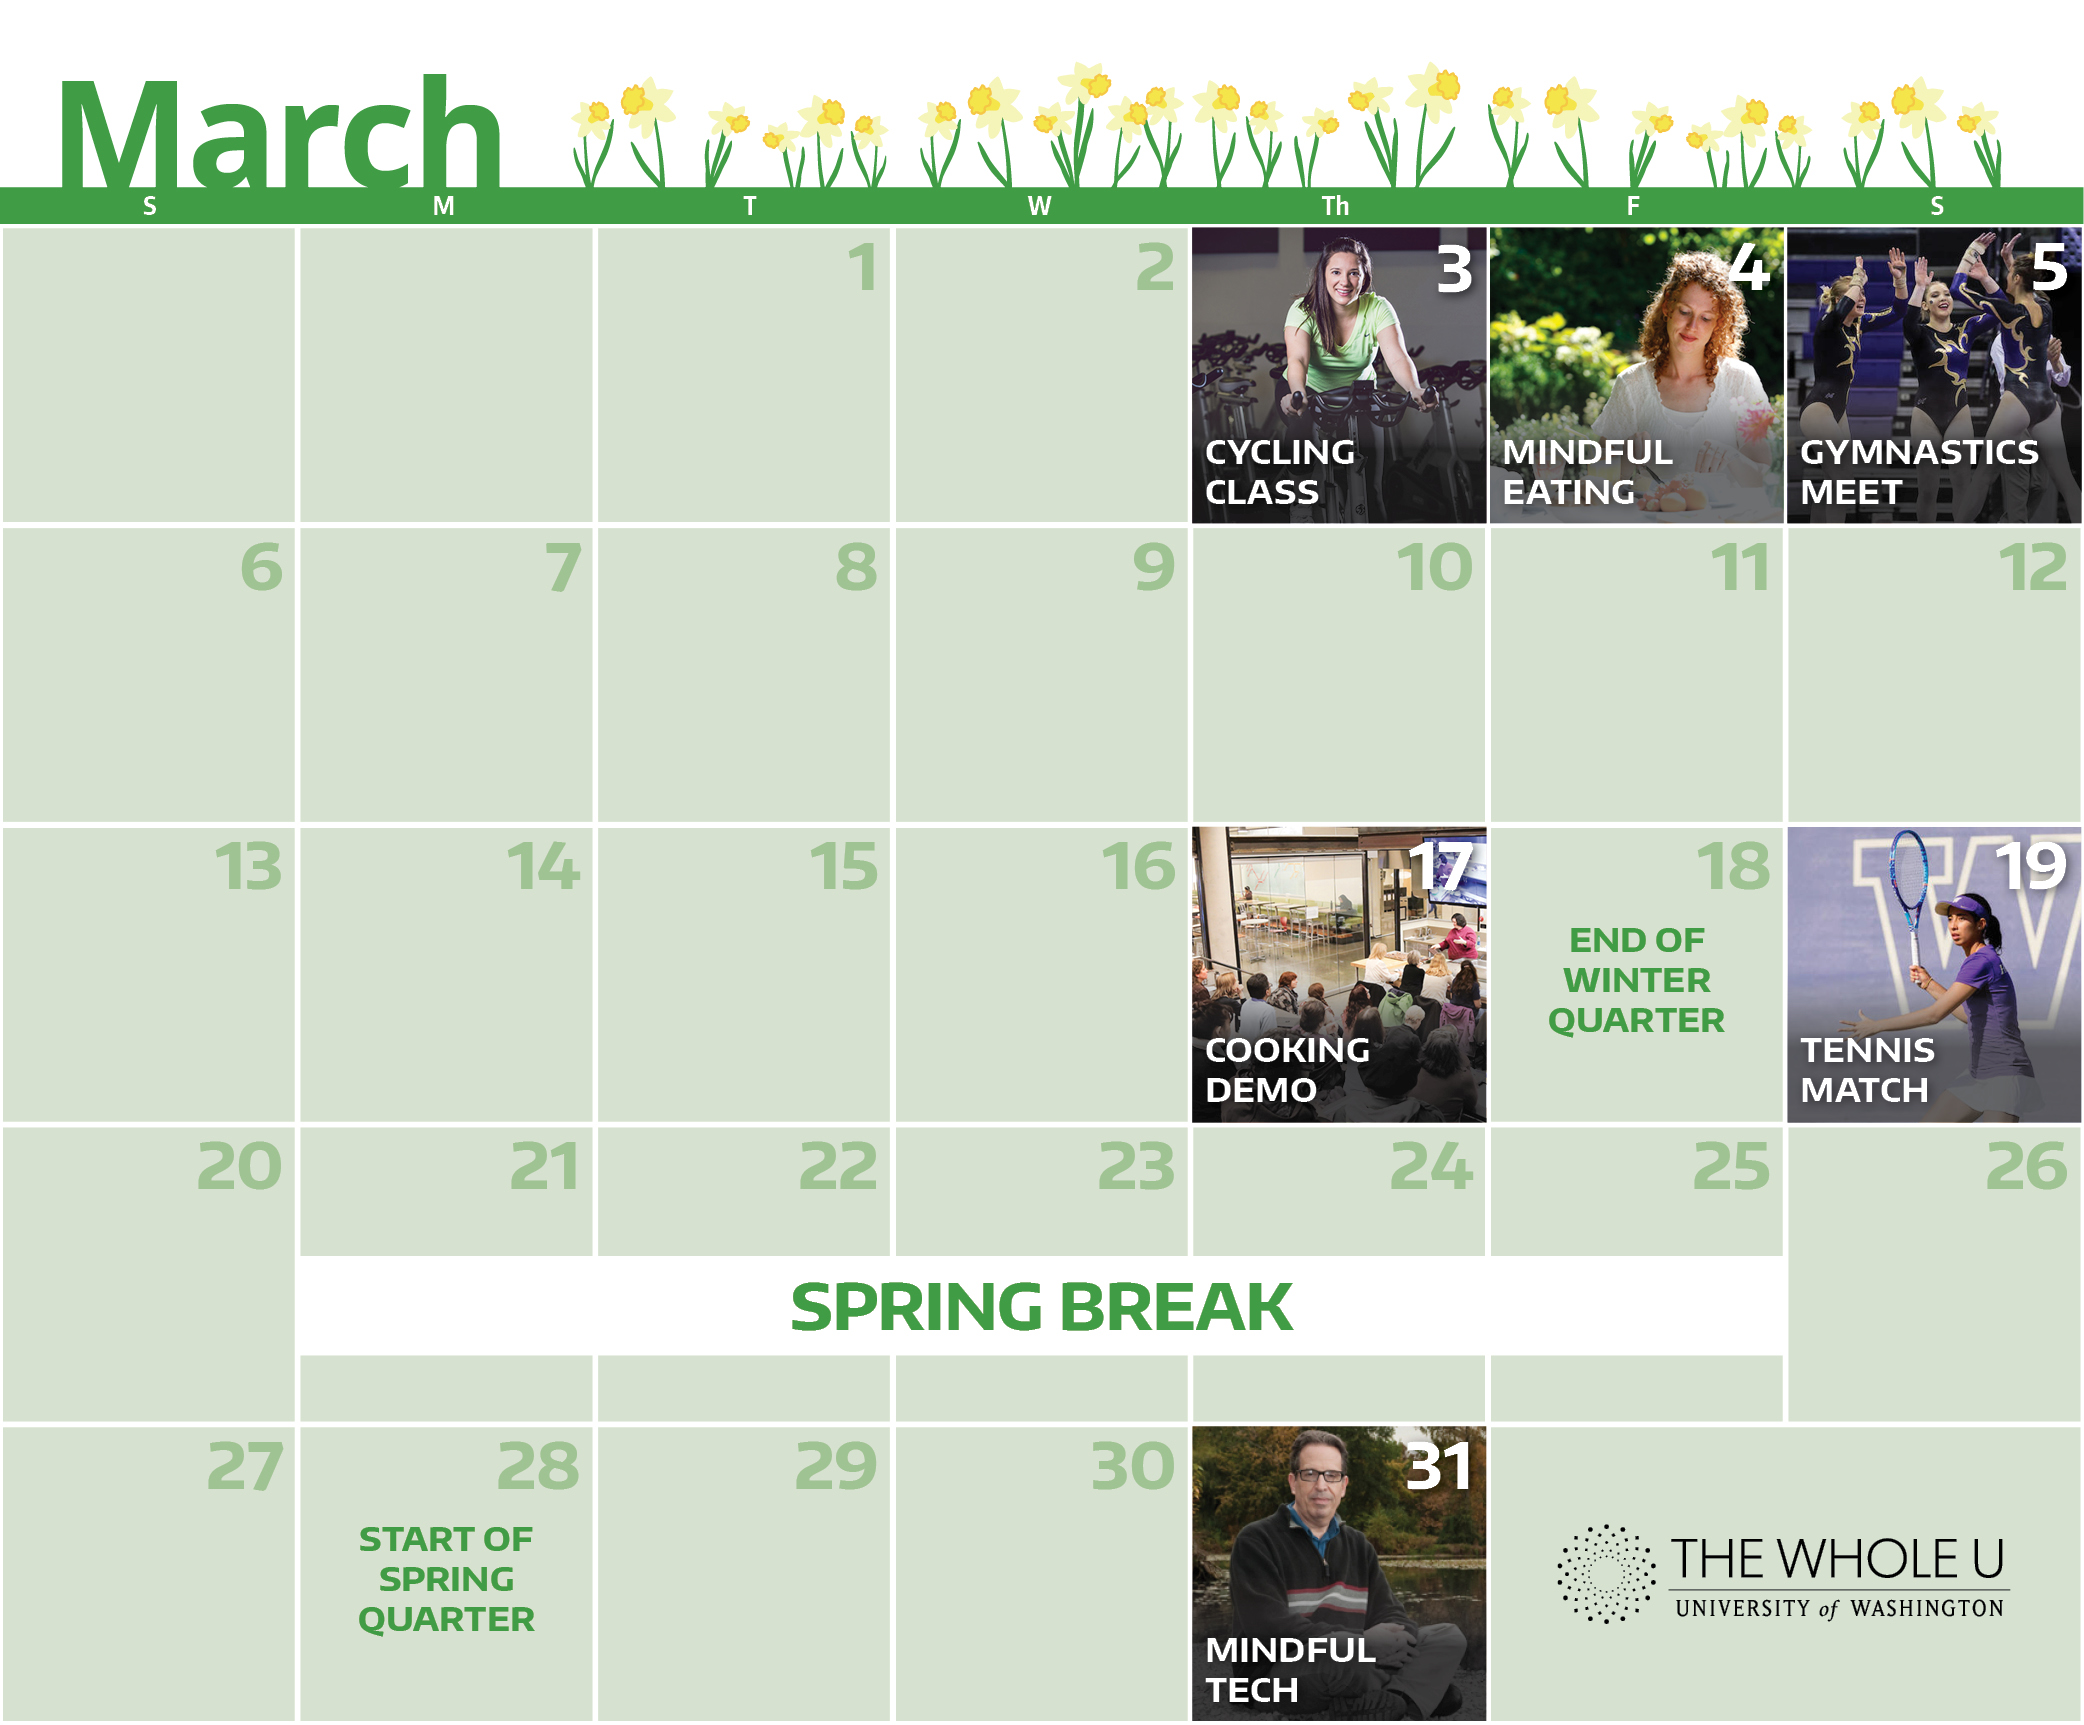 March Whole U events